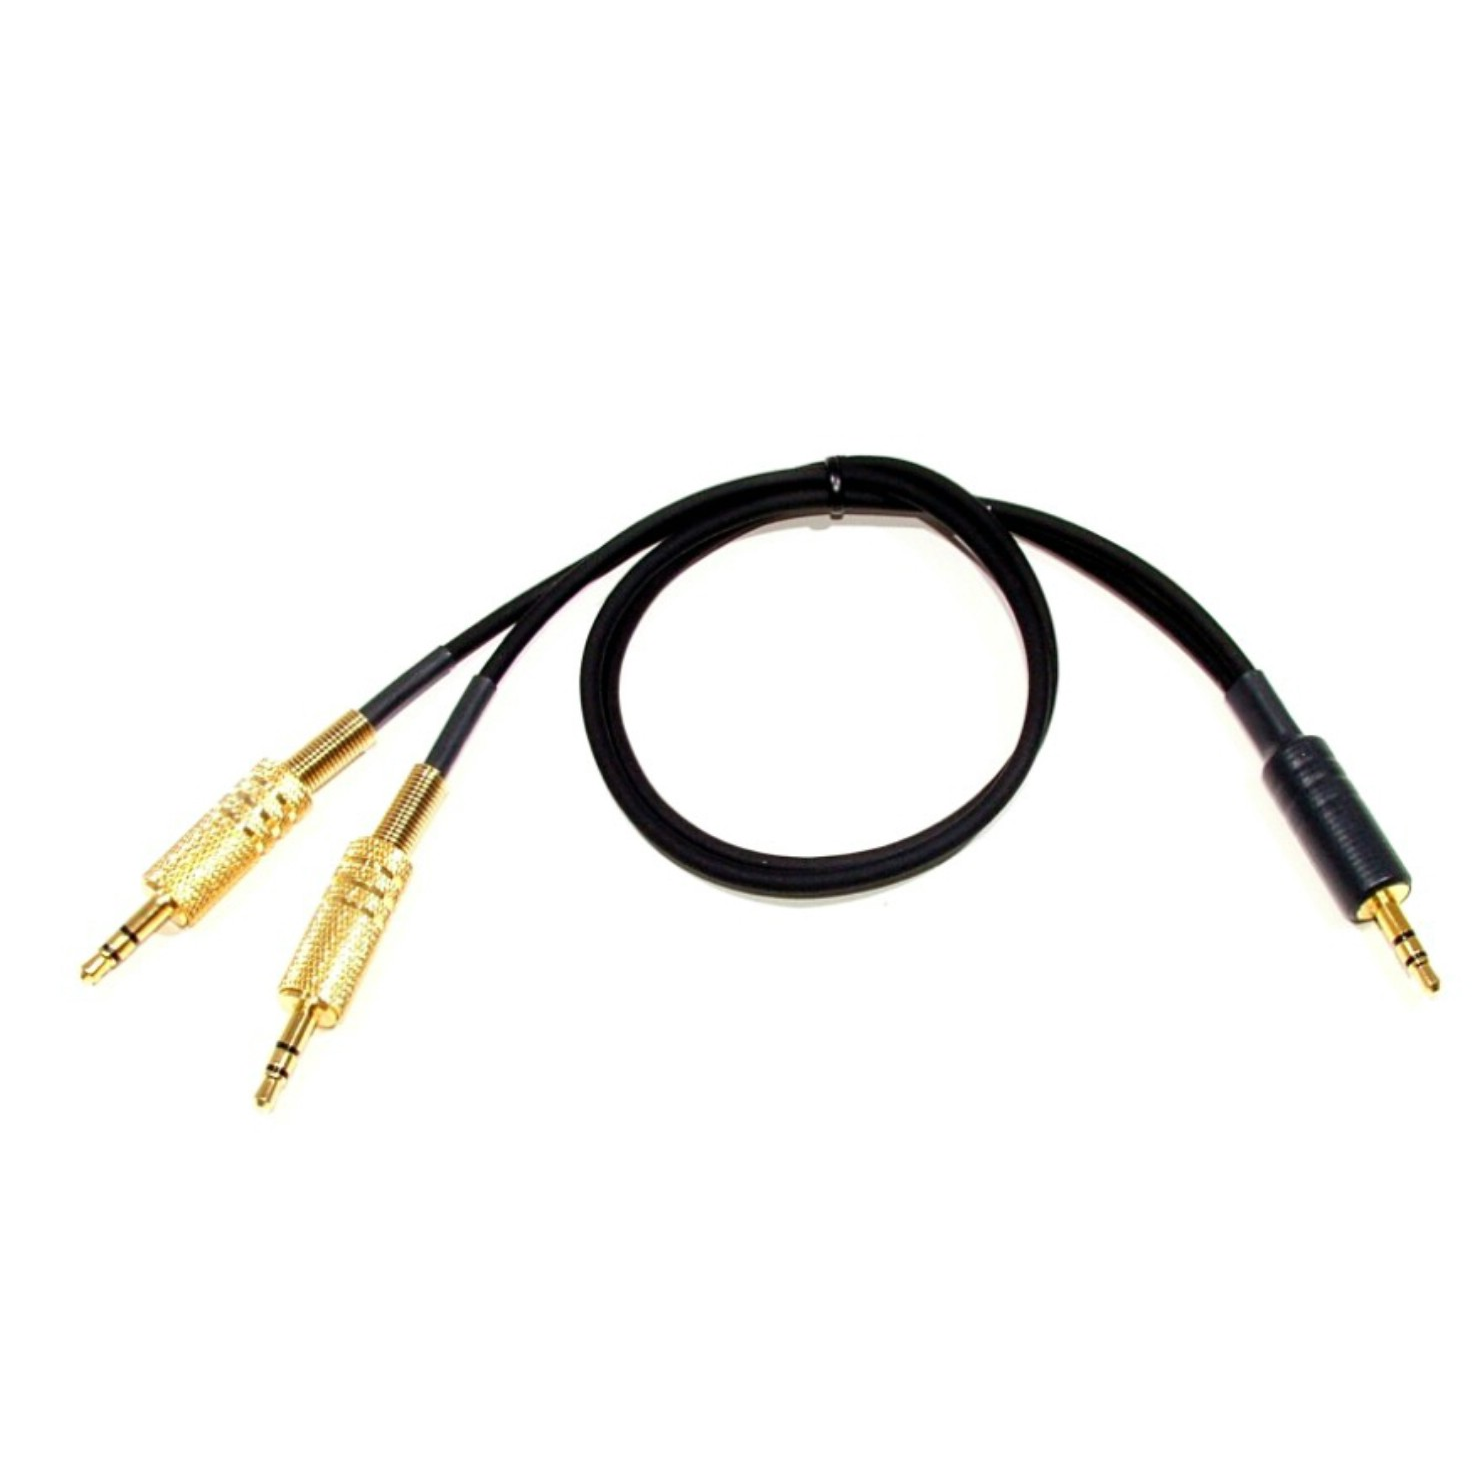 SP-SSA-2P - Custom Y cable - male 3.5mm to male 3.5mm to male 3.5mm Questions & Answers